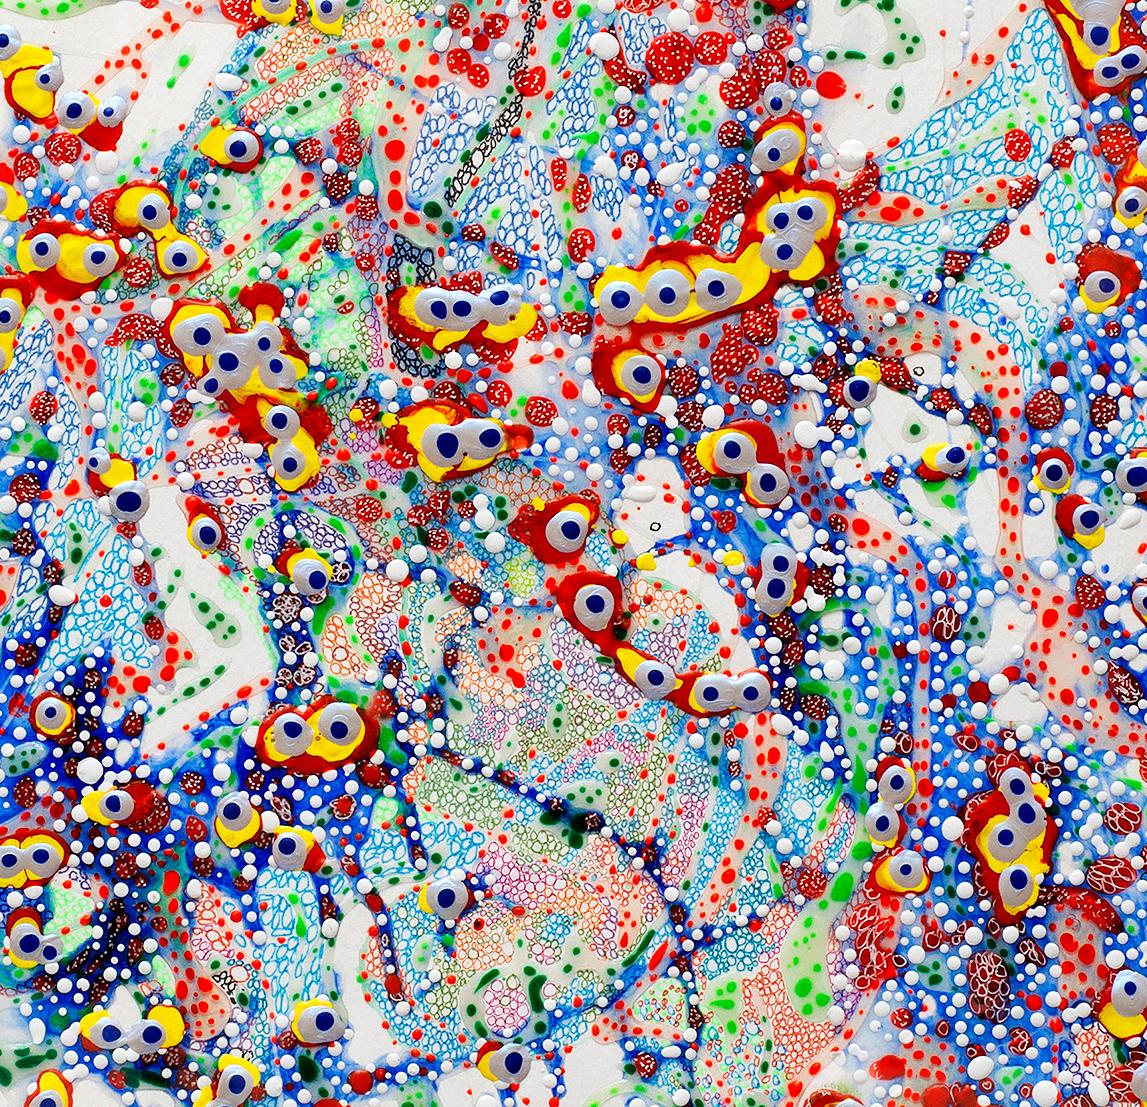 Elizabeth Knowles Abstract Drawing - "Untitled NETwork", textured dots of red, blue, and yellow, a woven beaded mesh